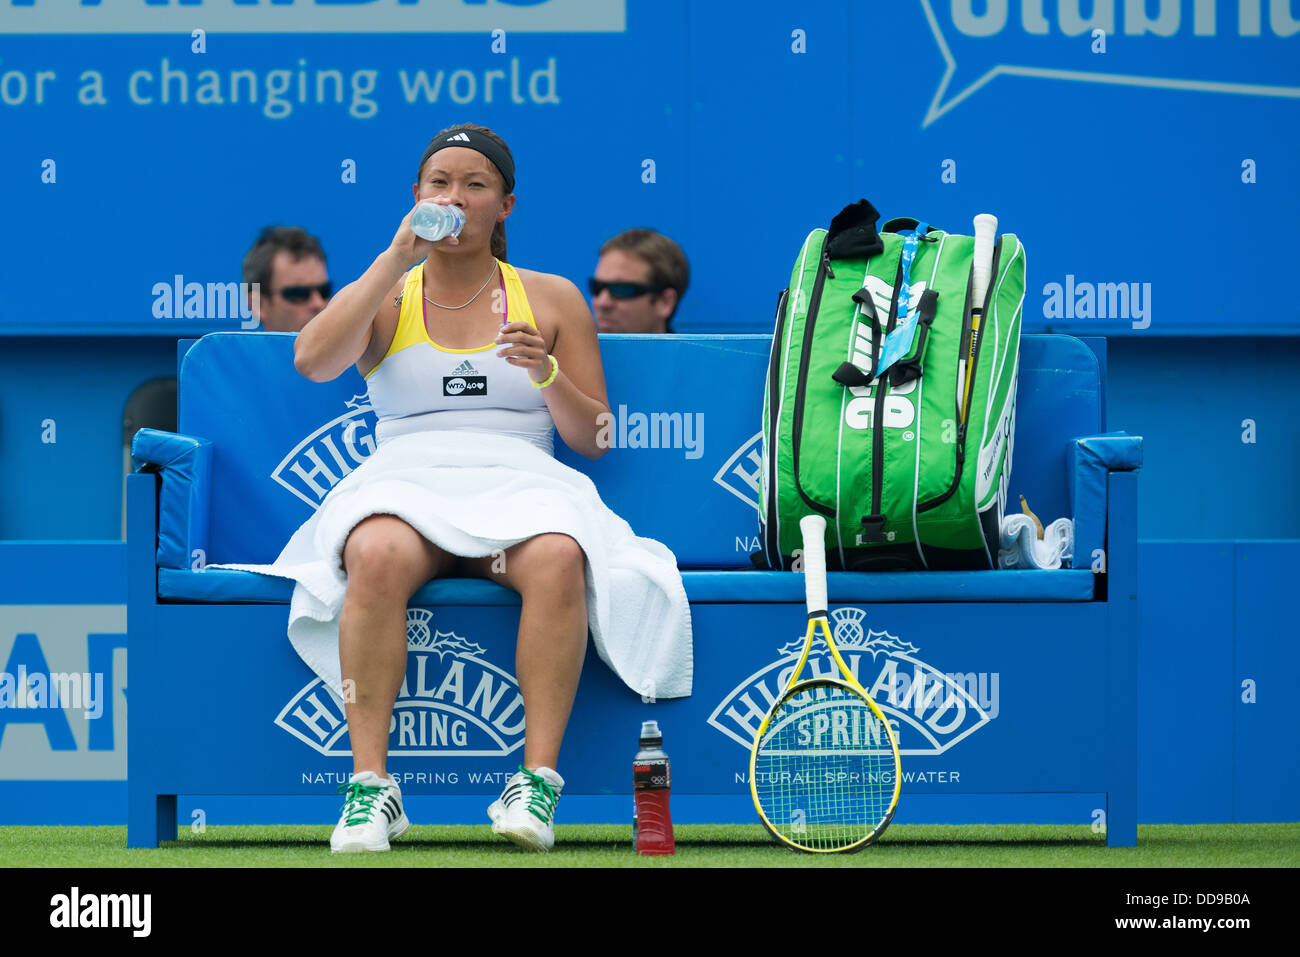 British tennis player Tara Moore takes a drink during the break between games on a blue bench with a towel over her for modesty Stock Photo